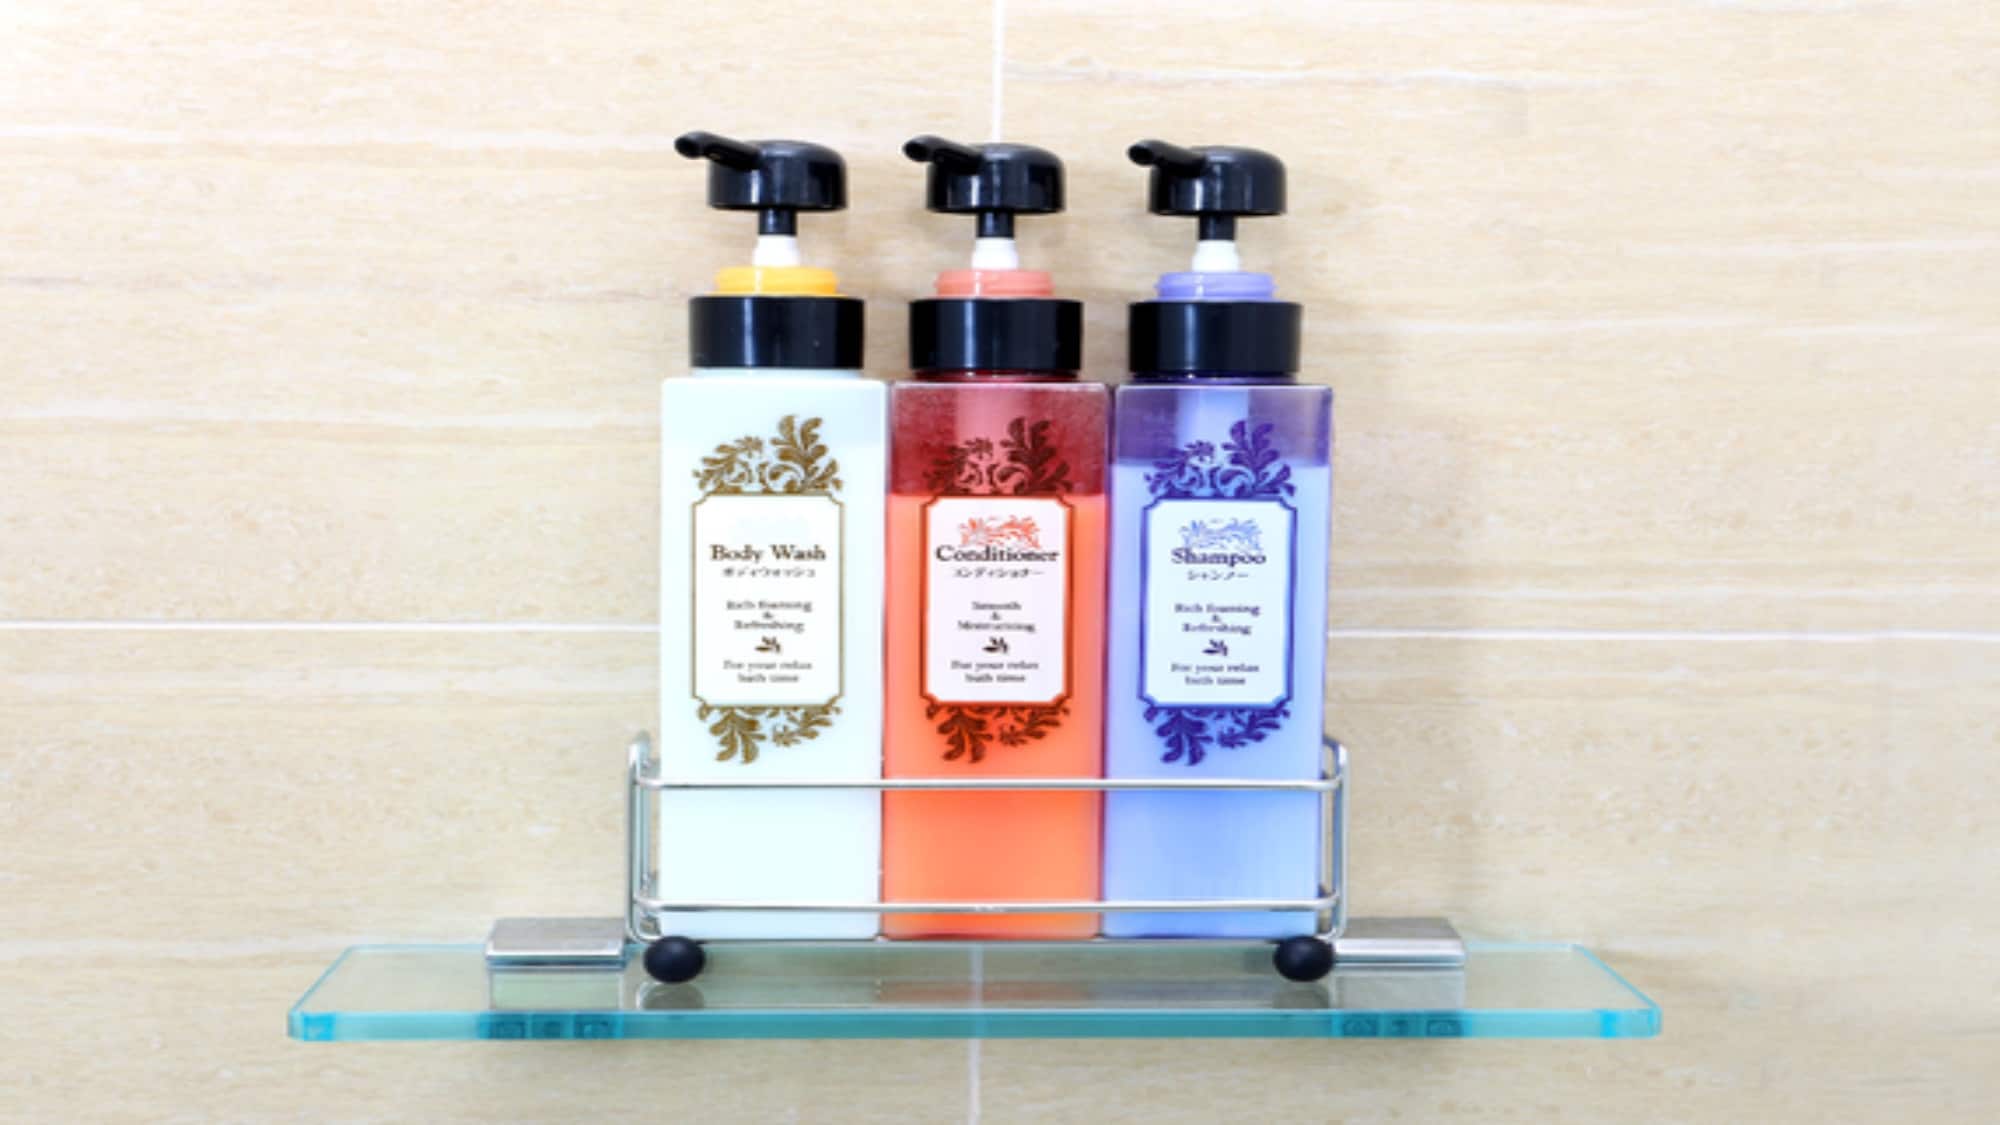 [Annex Building] Guest rooms shampoos